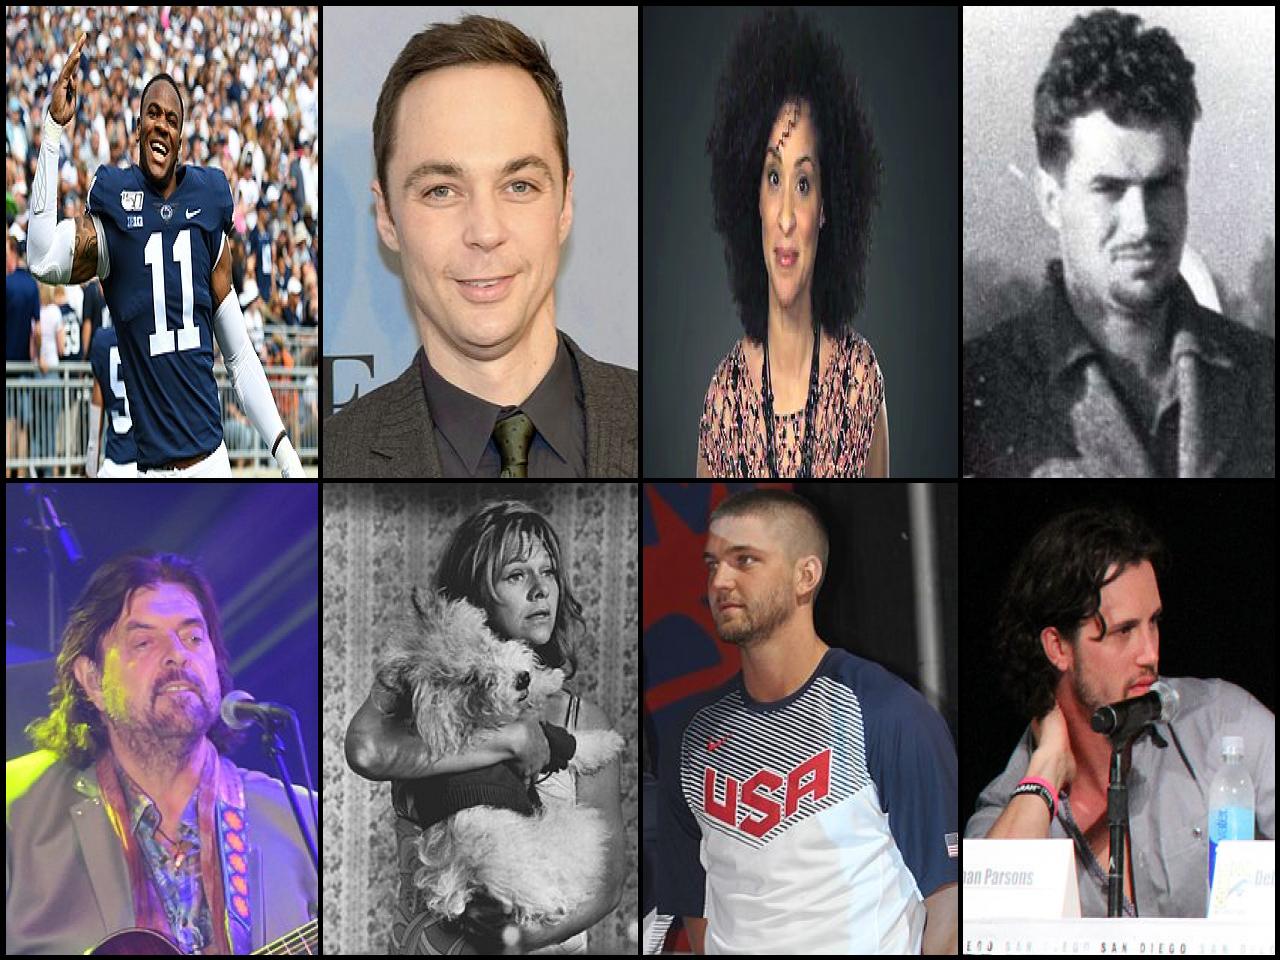 Famous People with surname Parsons